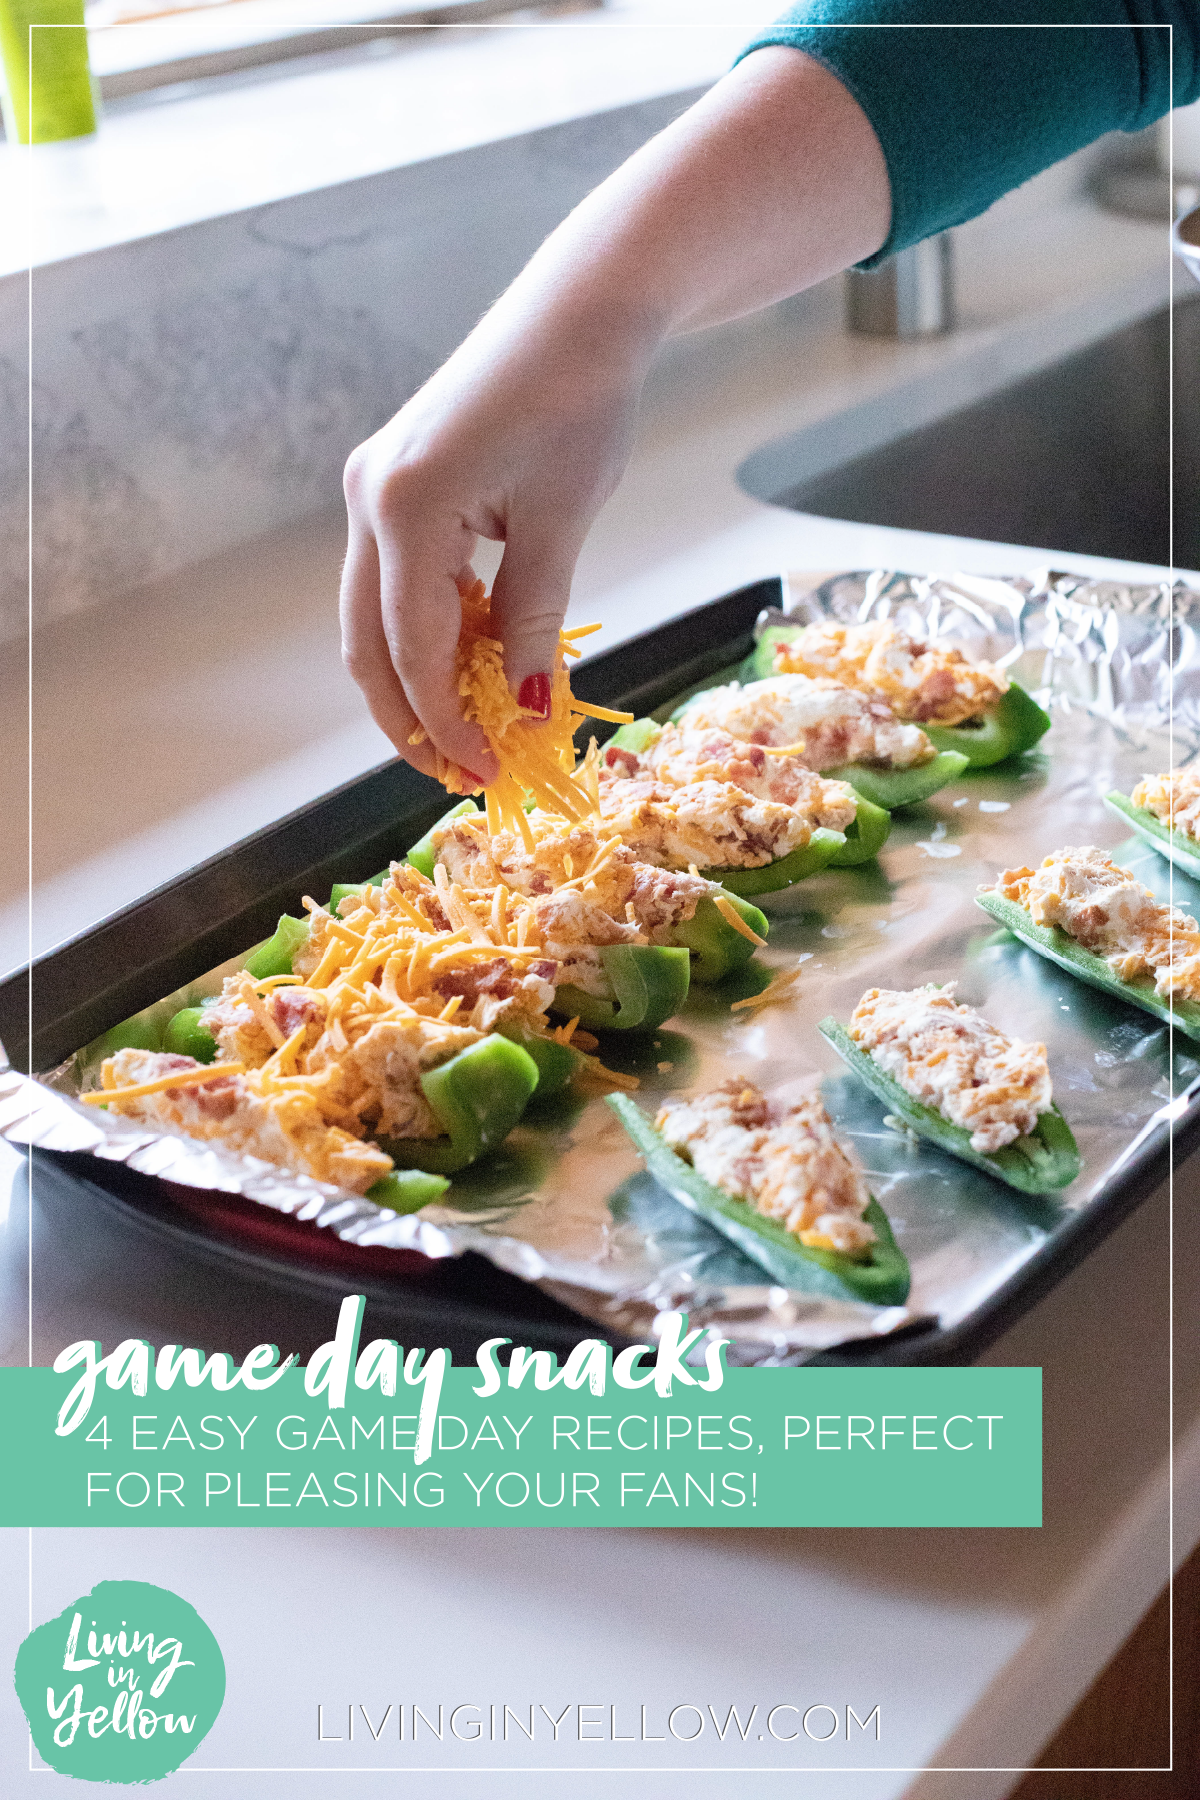 Game day dishes that will cost you less